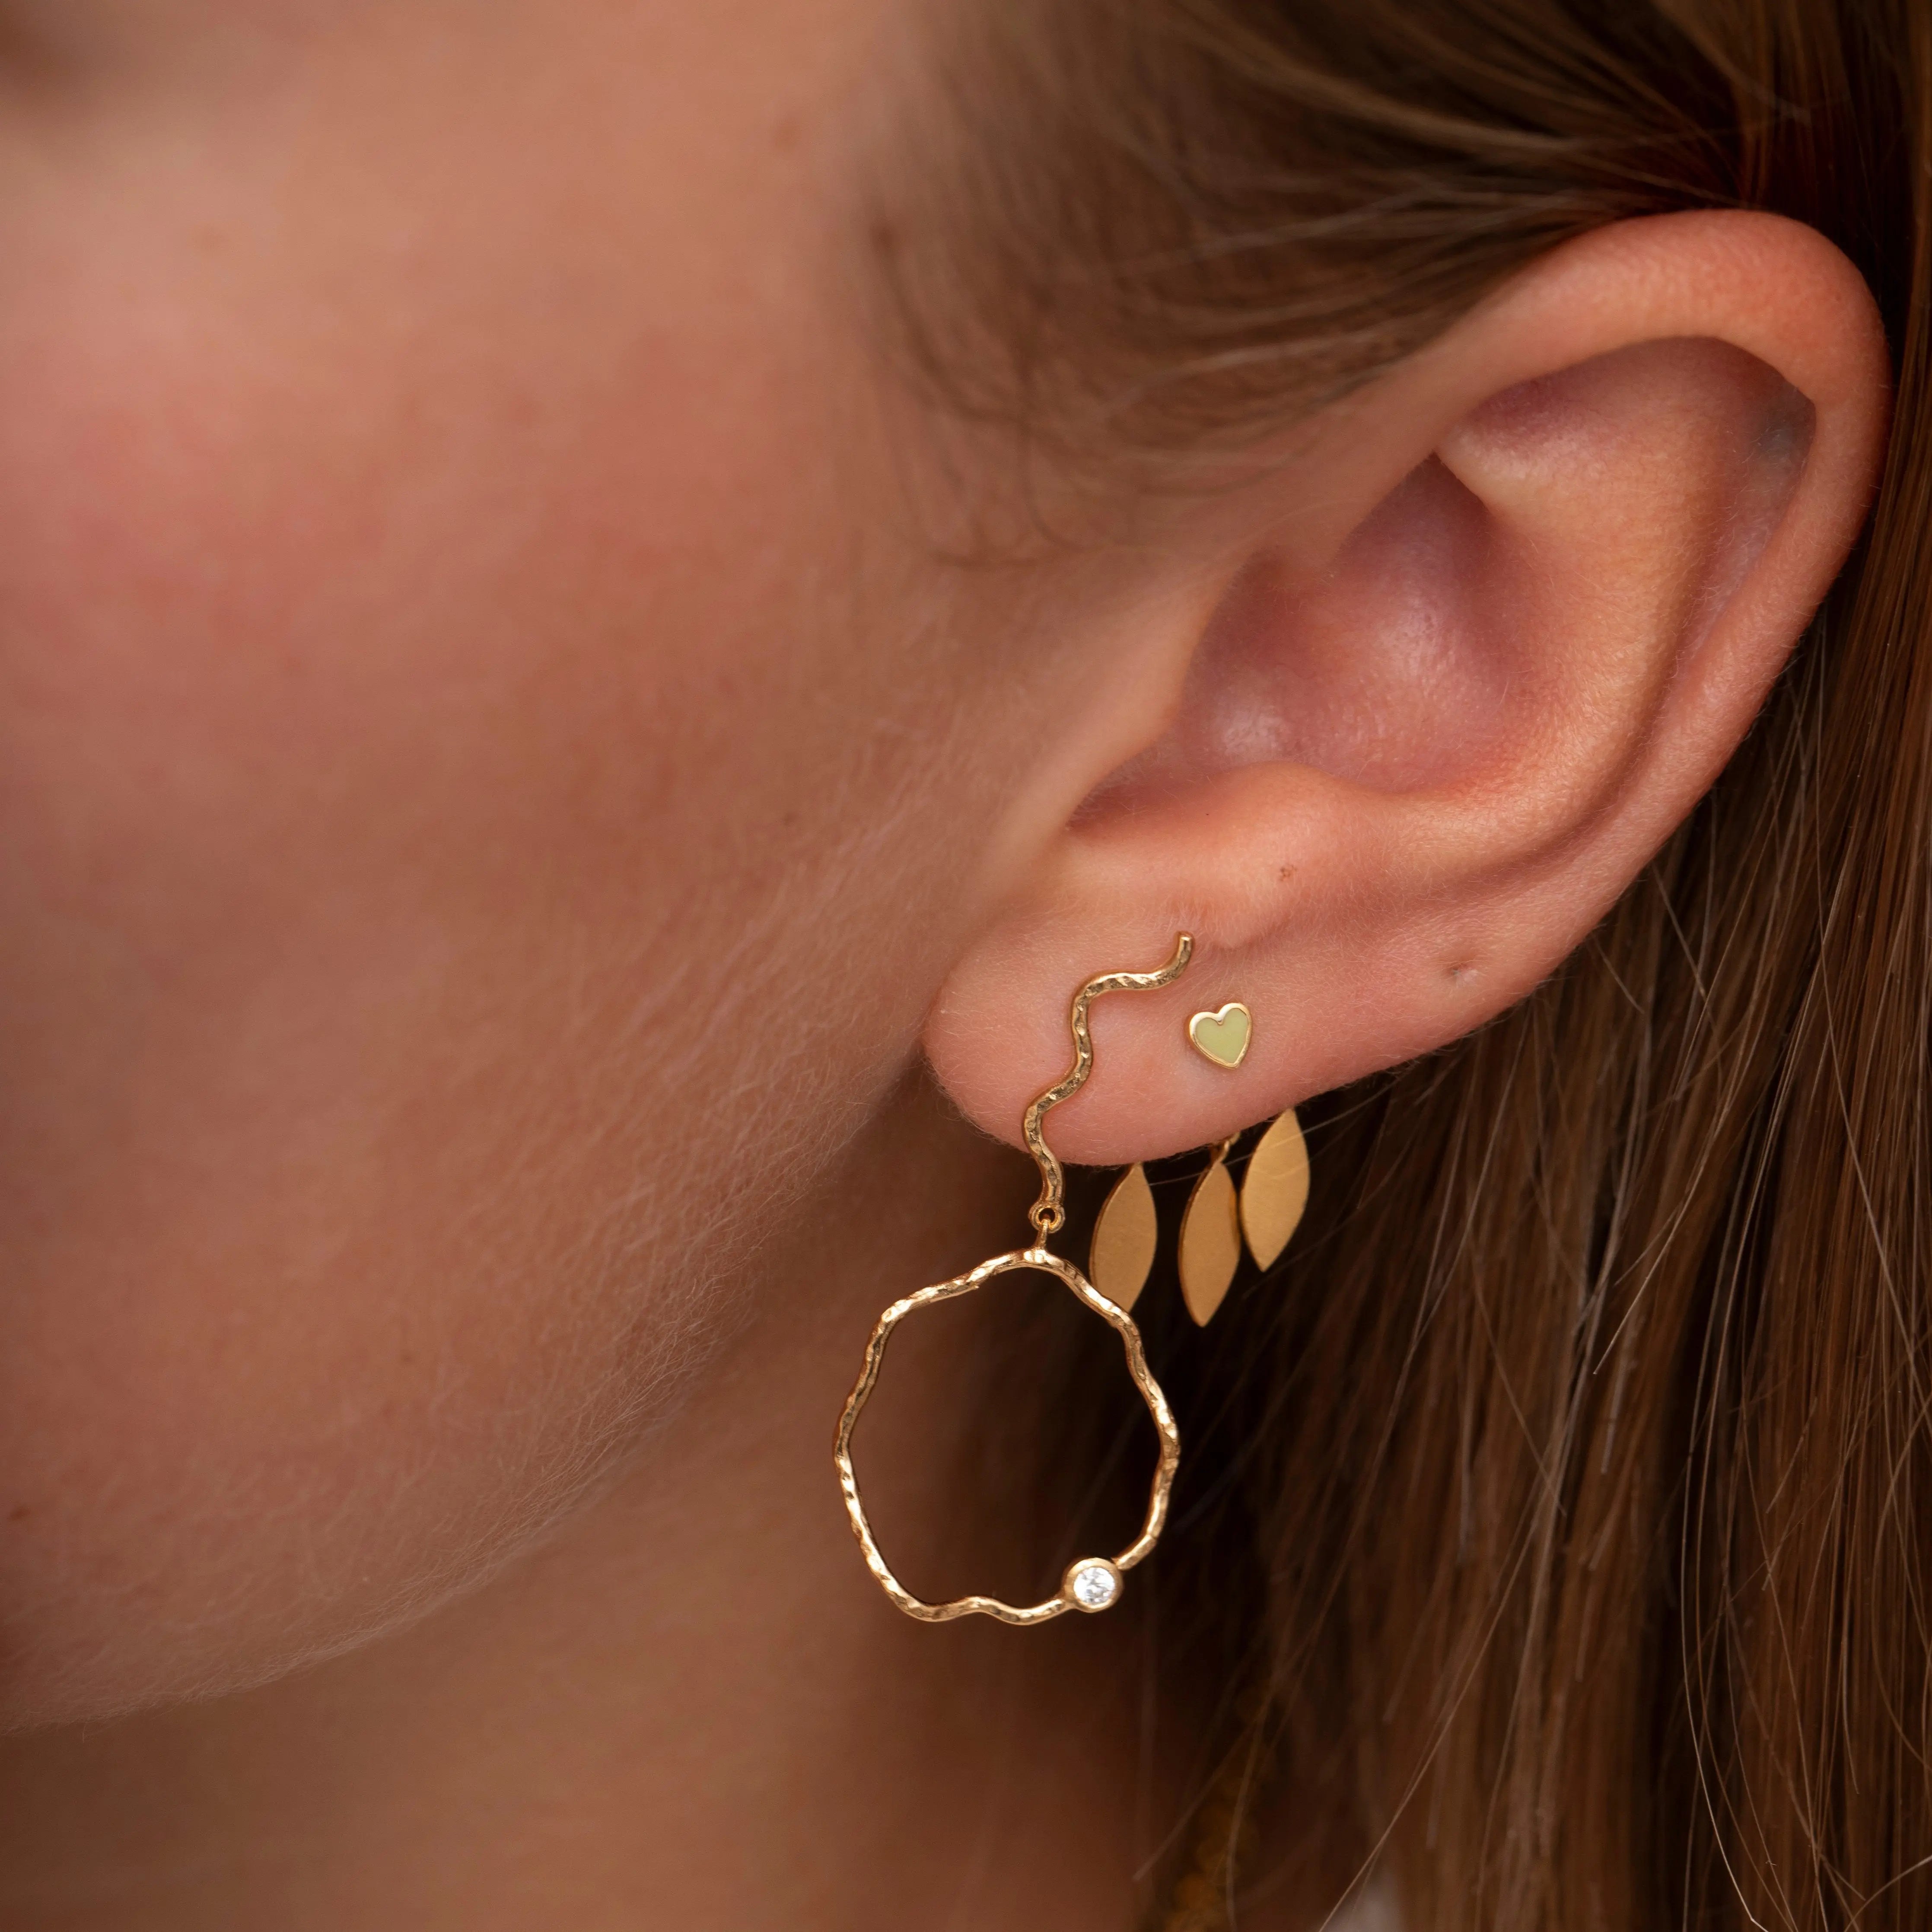 Dancing Three Leaves Behind Ear - Forgyldt fra Stine A Jewelry